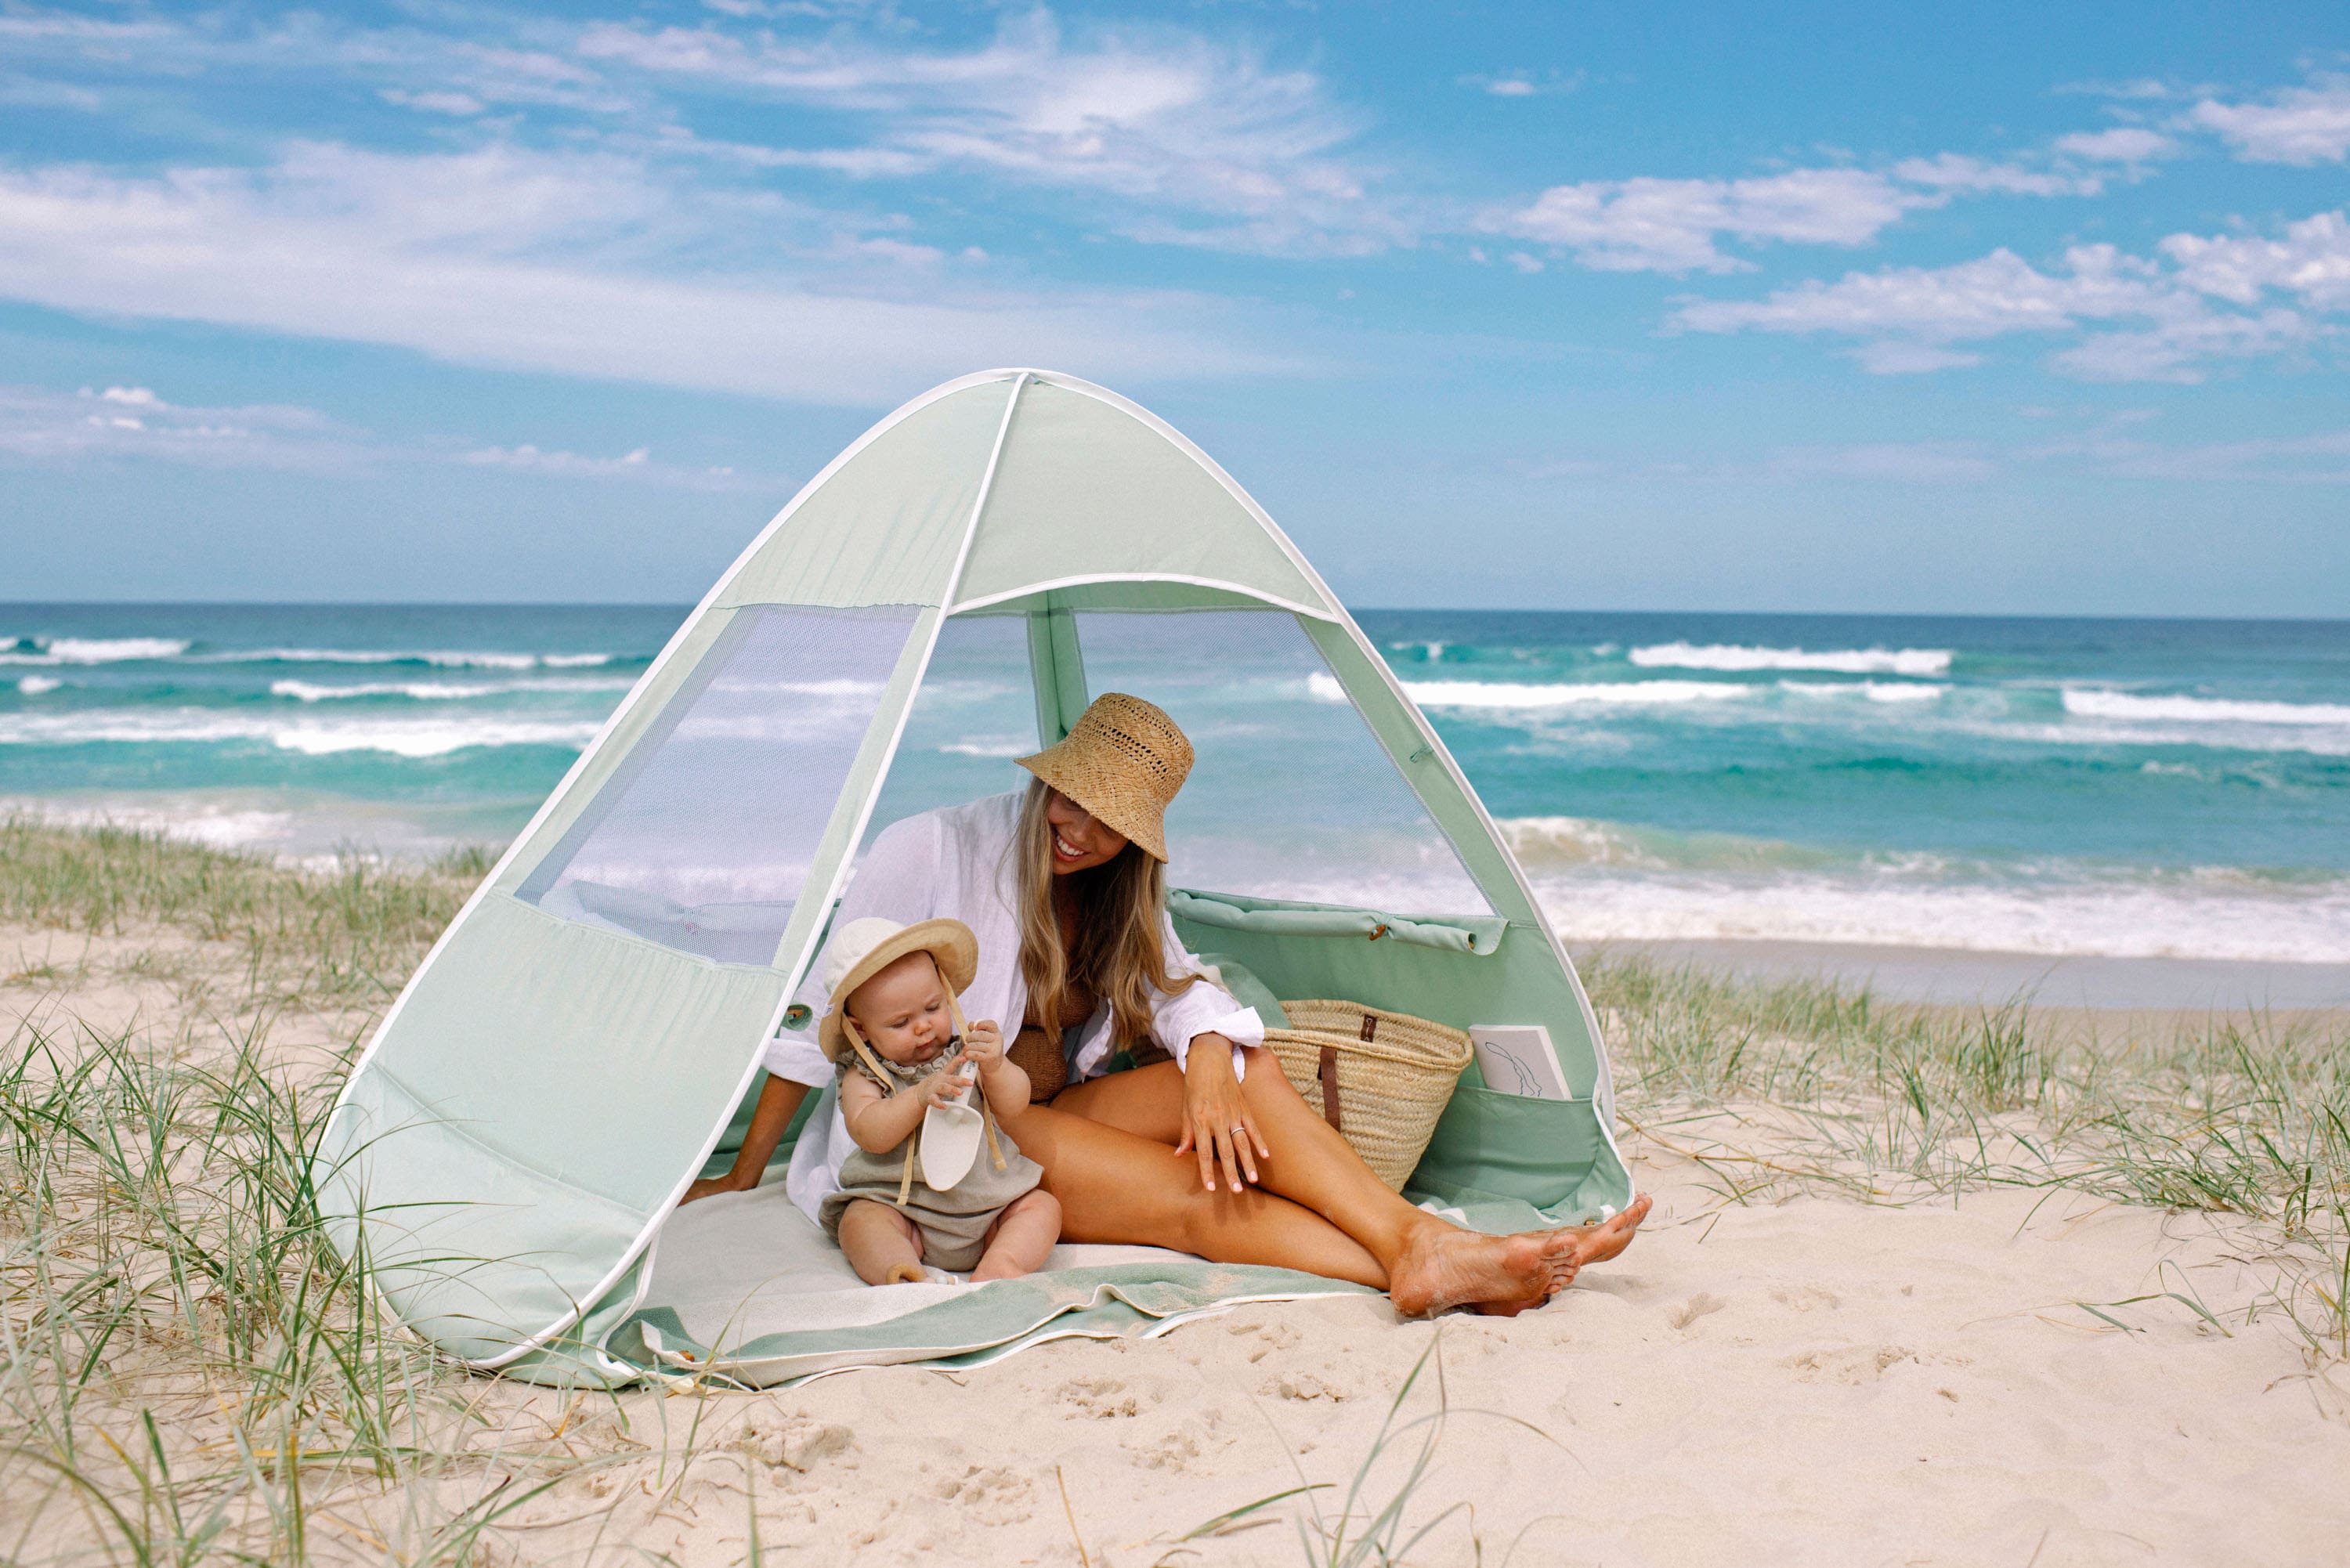 Mum and baby in pop-up beach tent, by Lozi & Gabe 